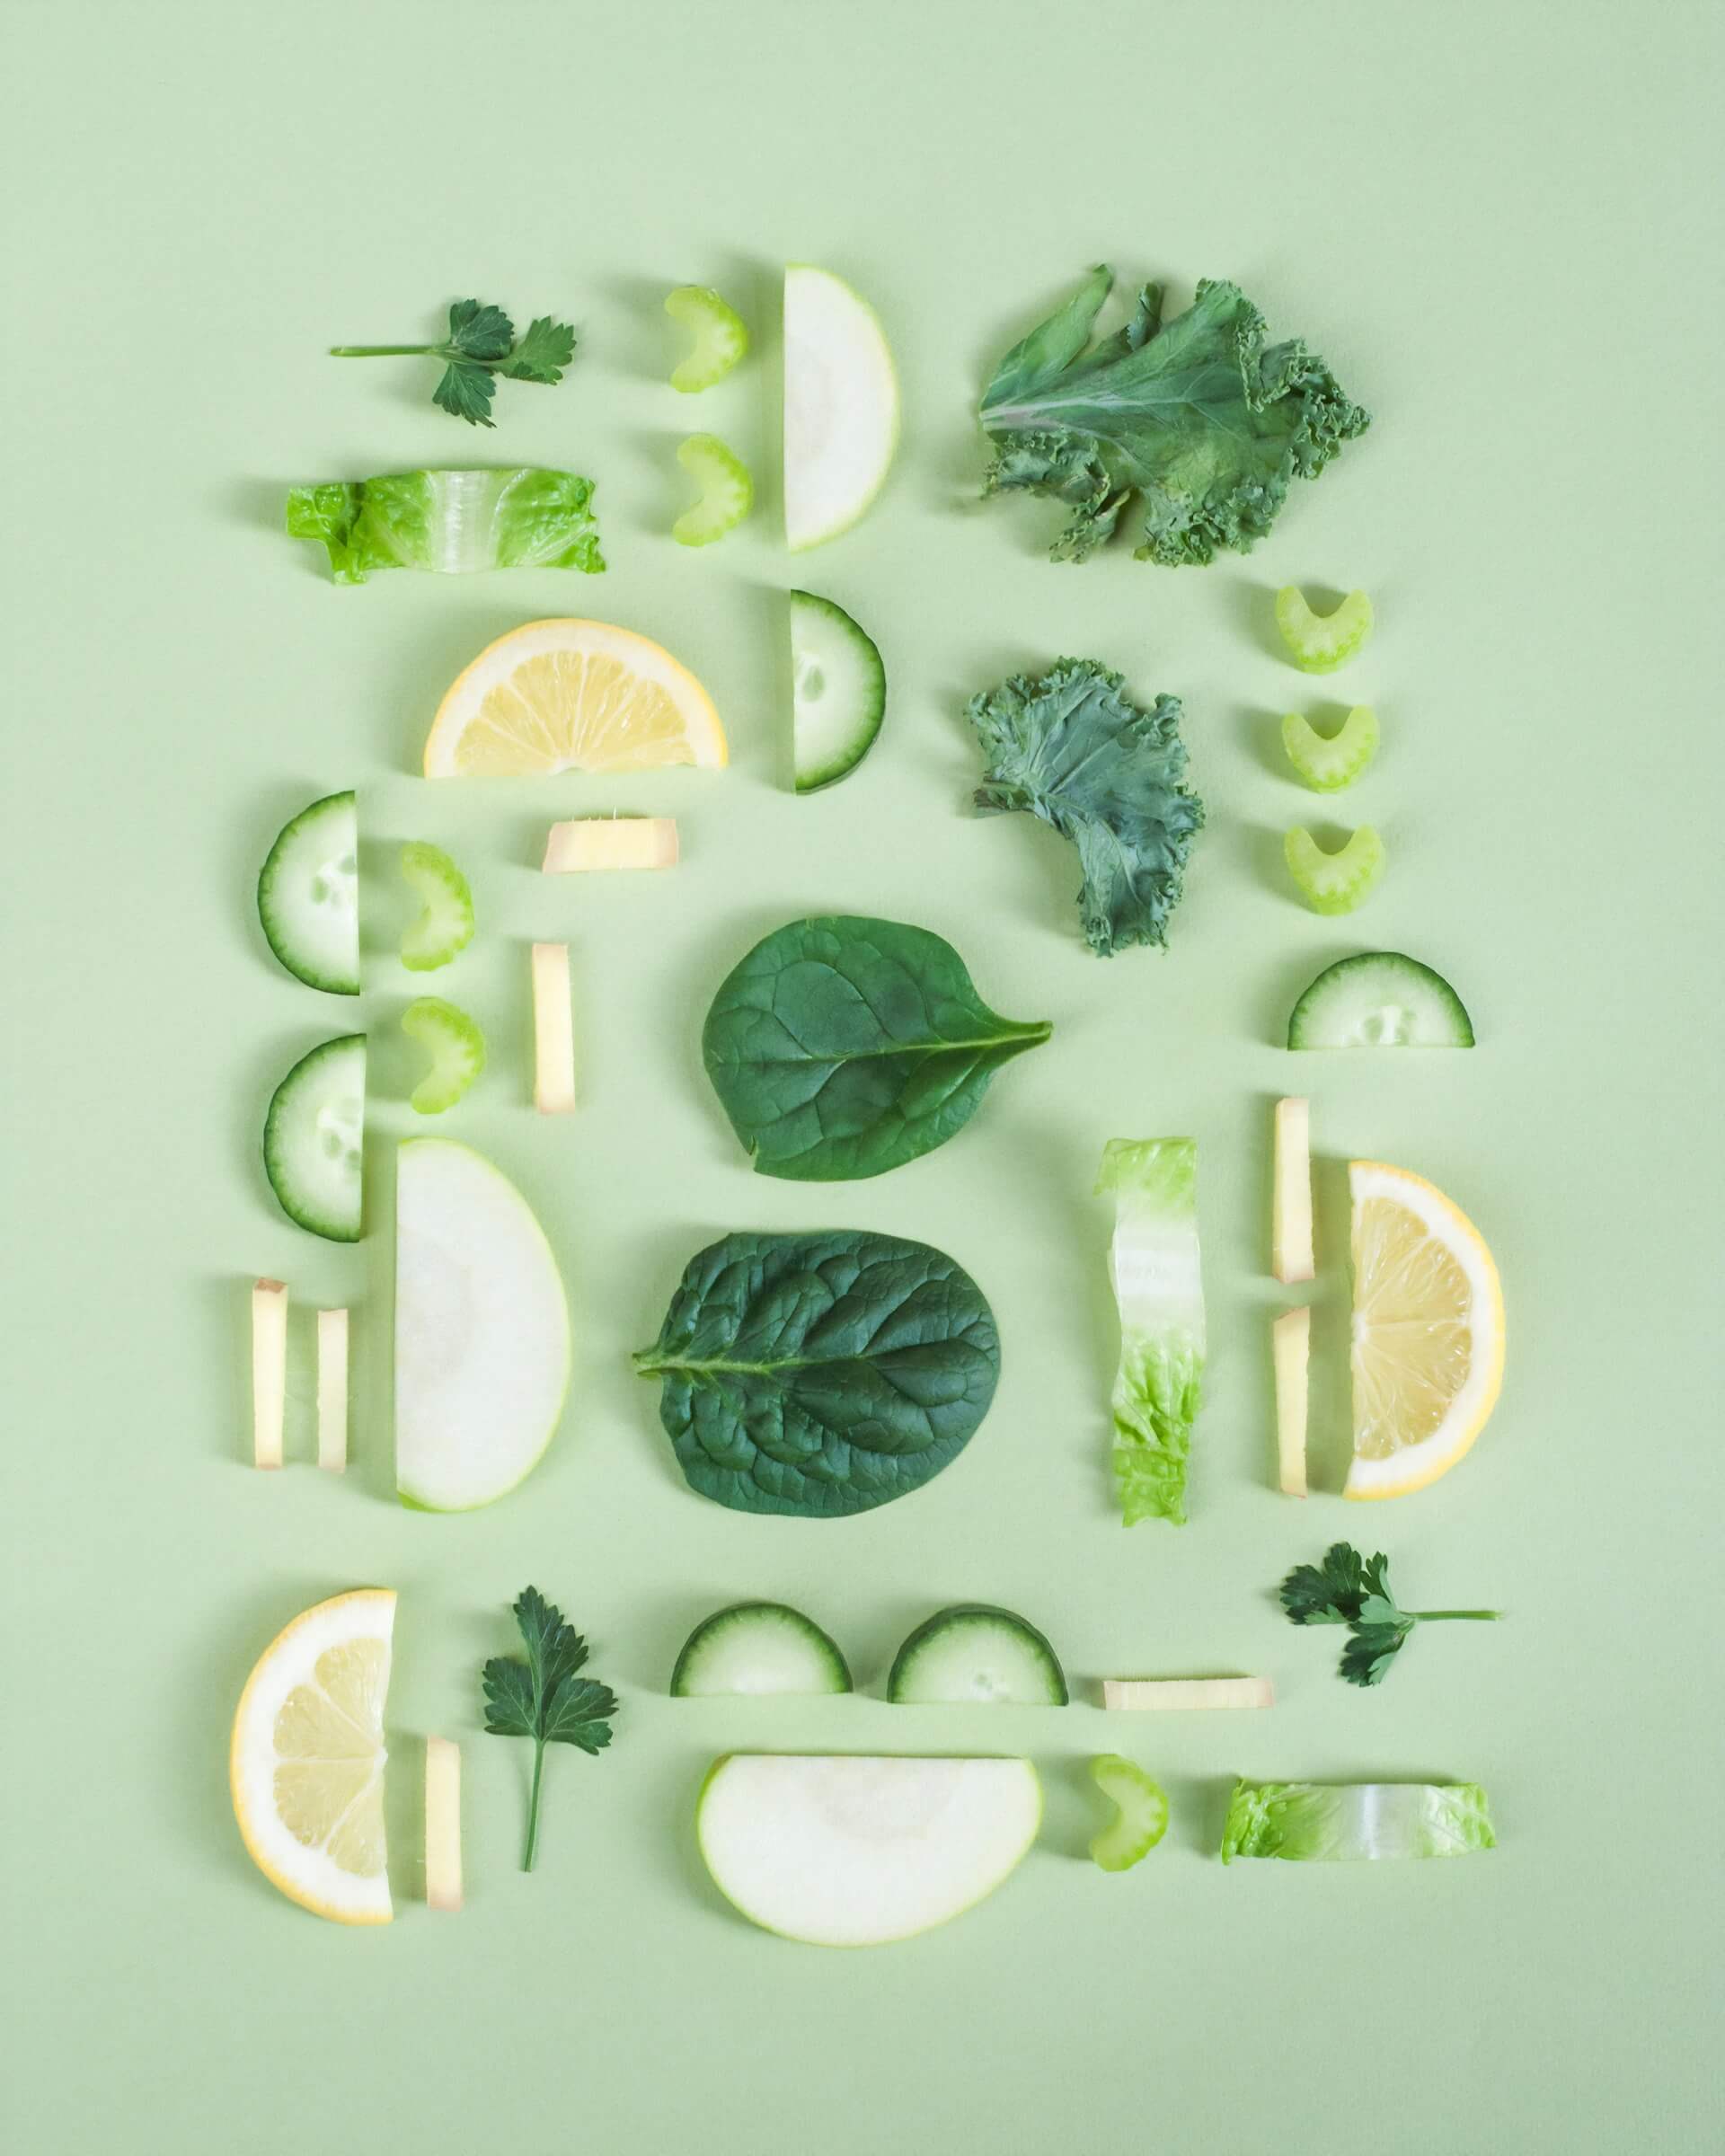 Different fruits and vegetables sliced against a green background